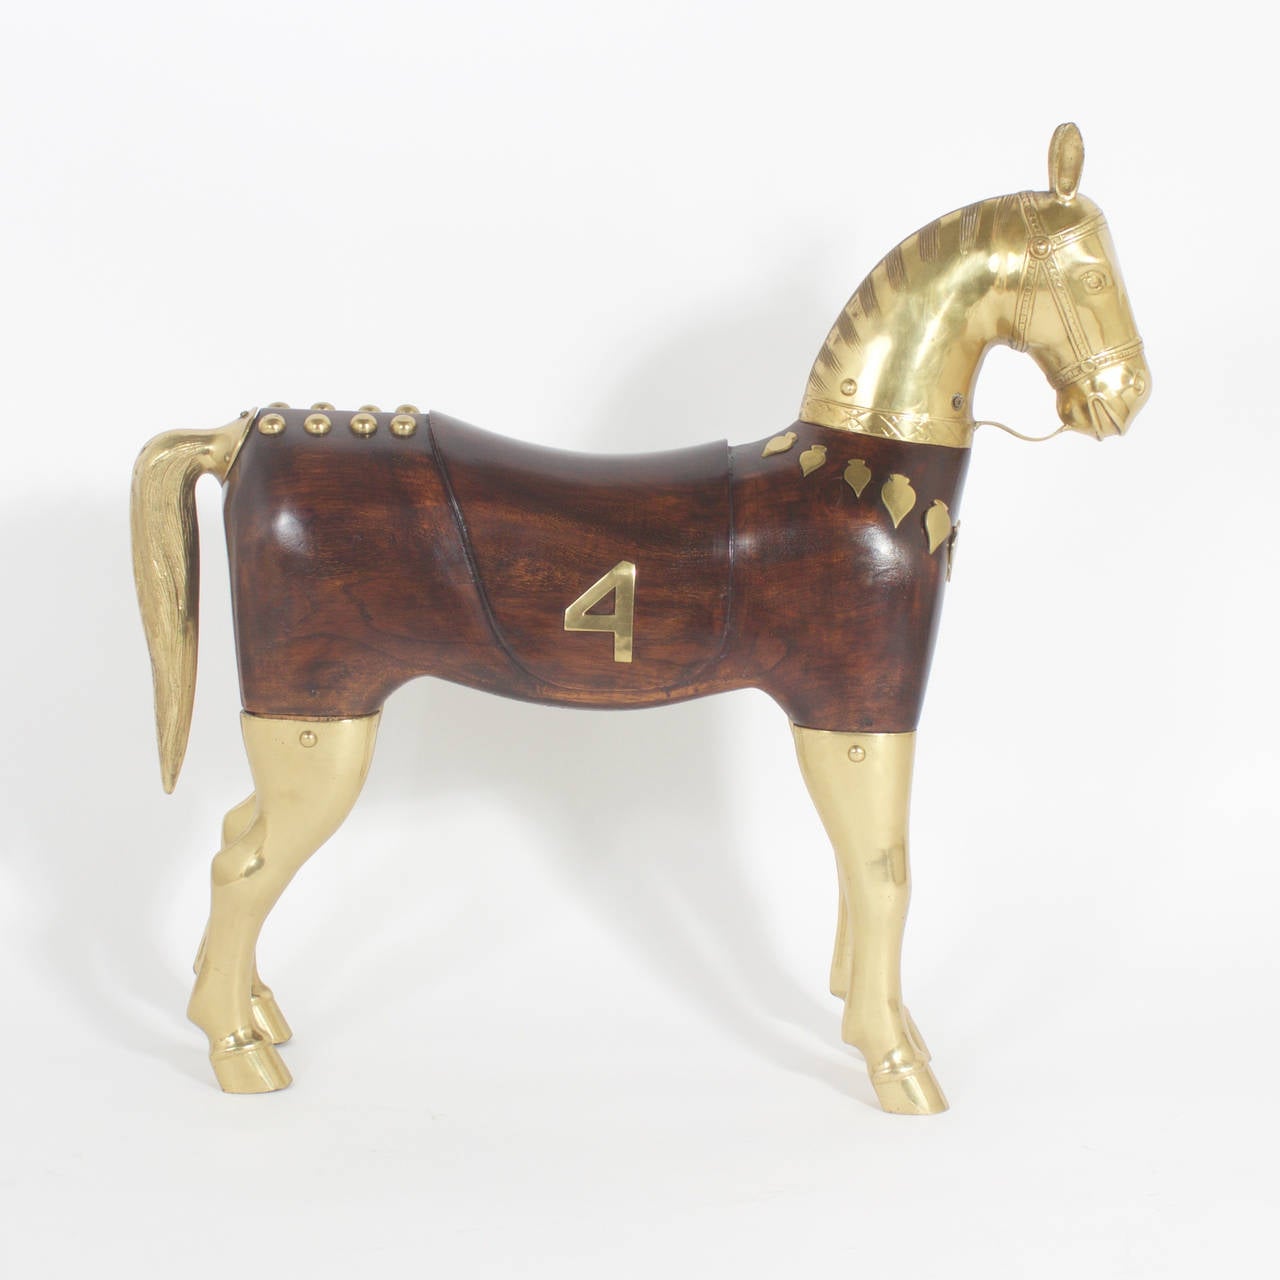 Country Brass and Wood Racing Horse